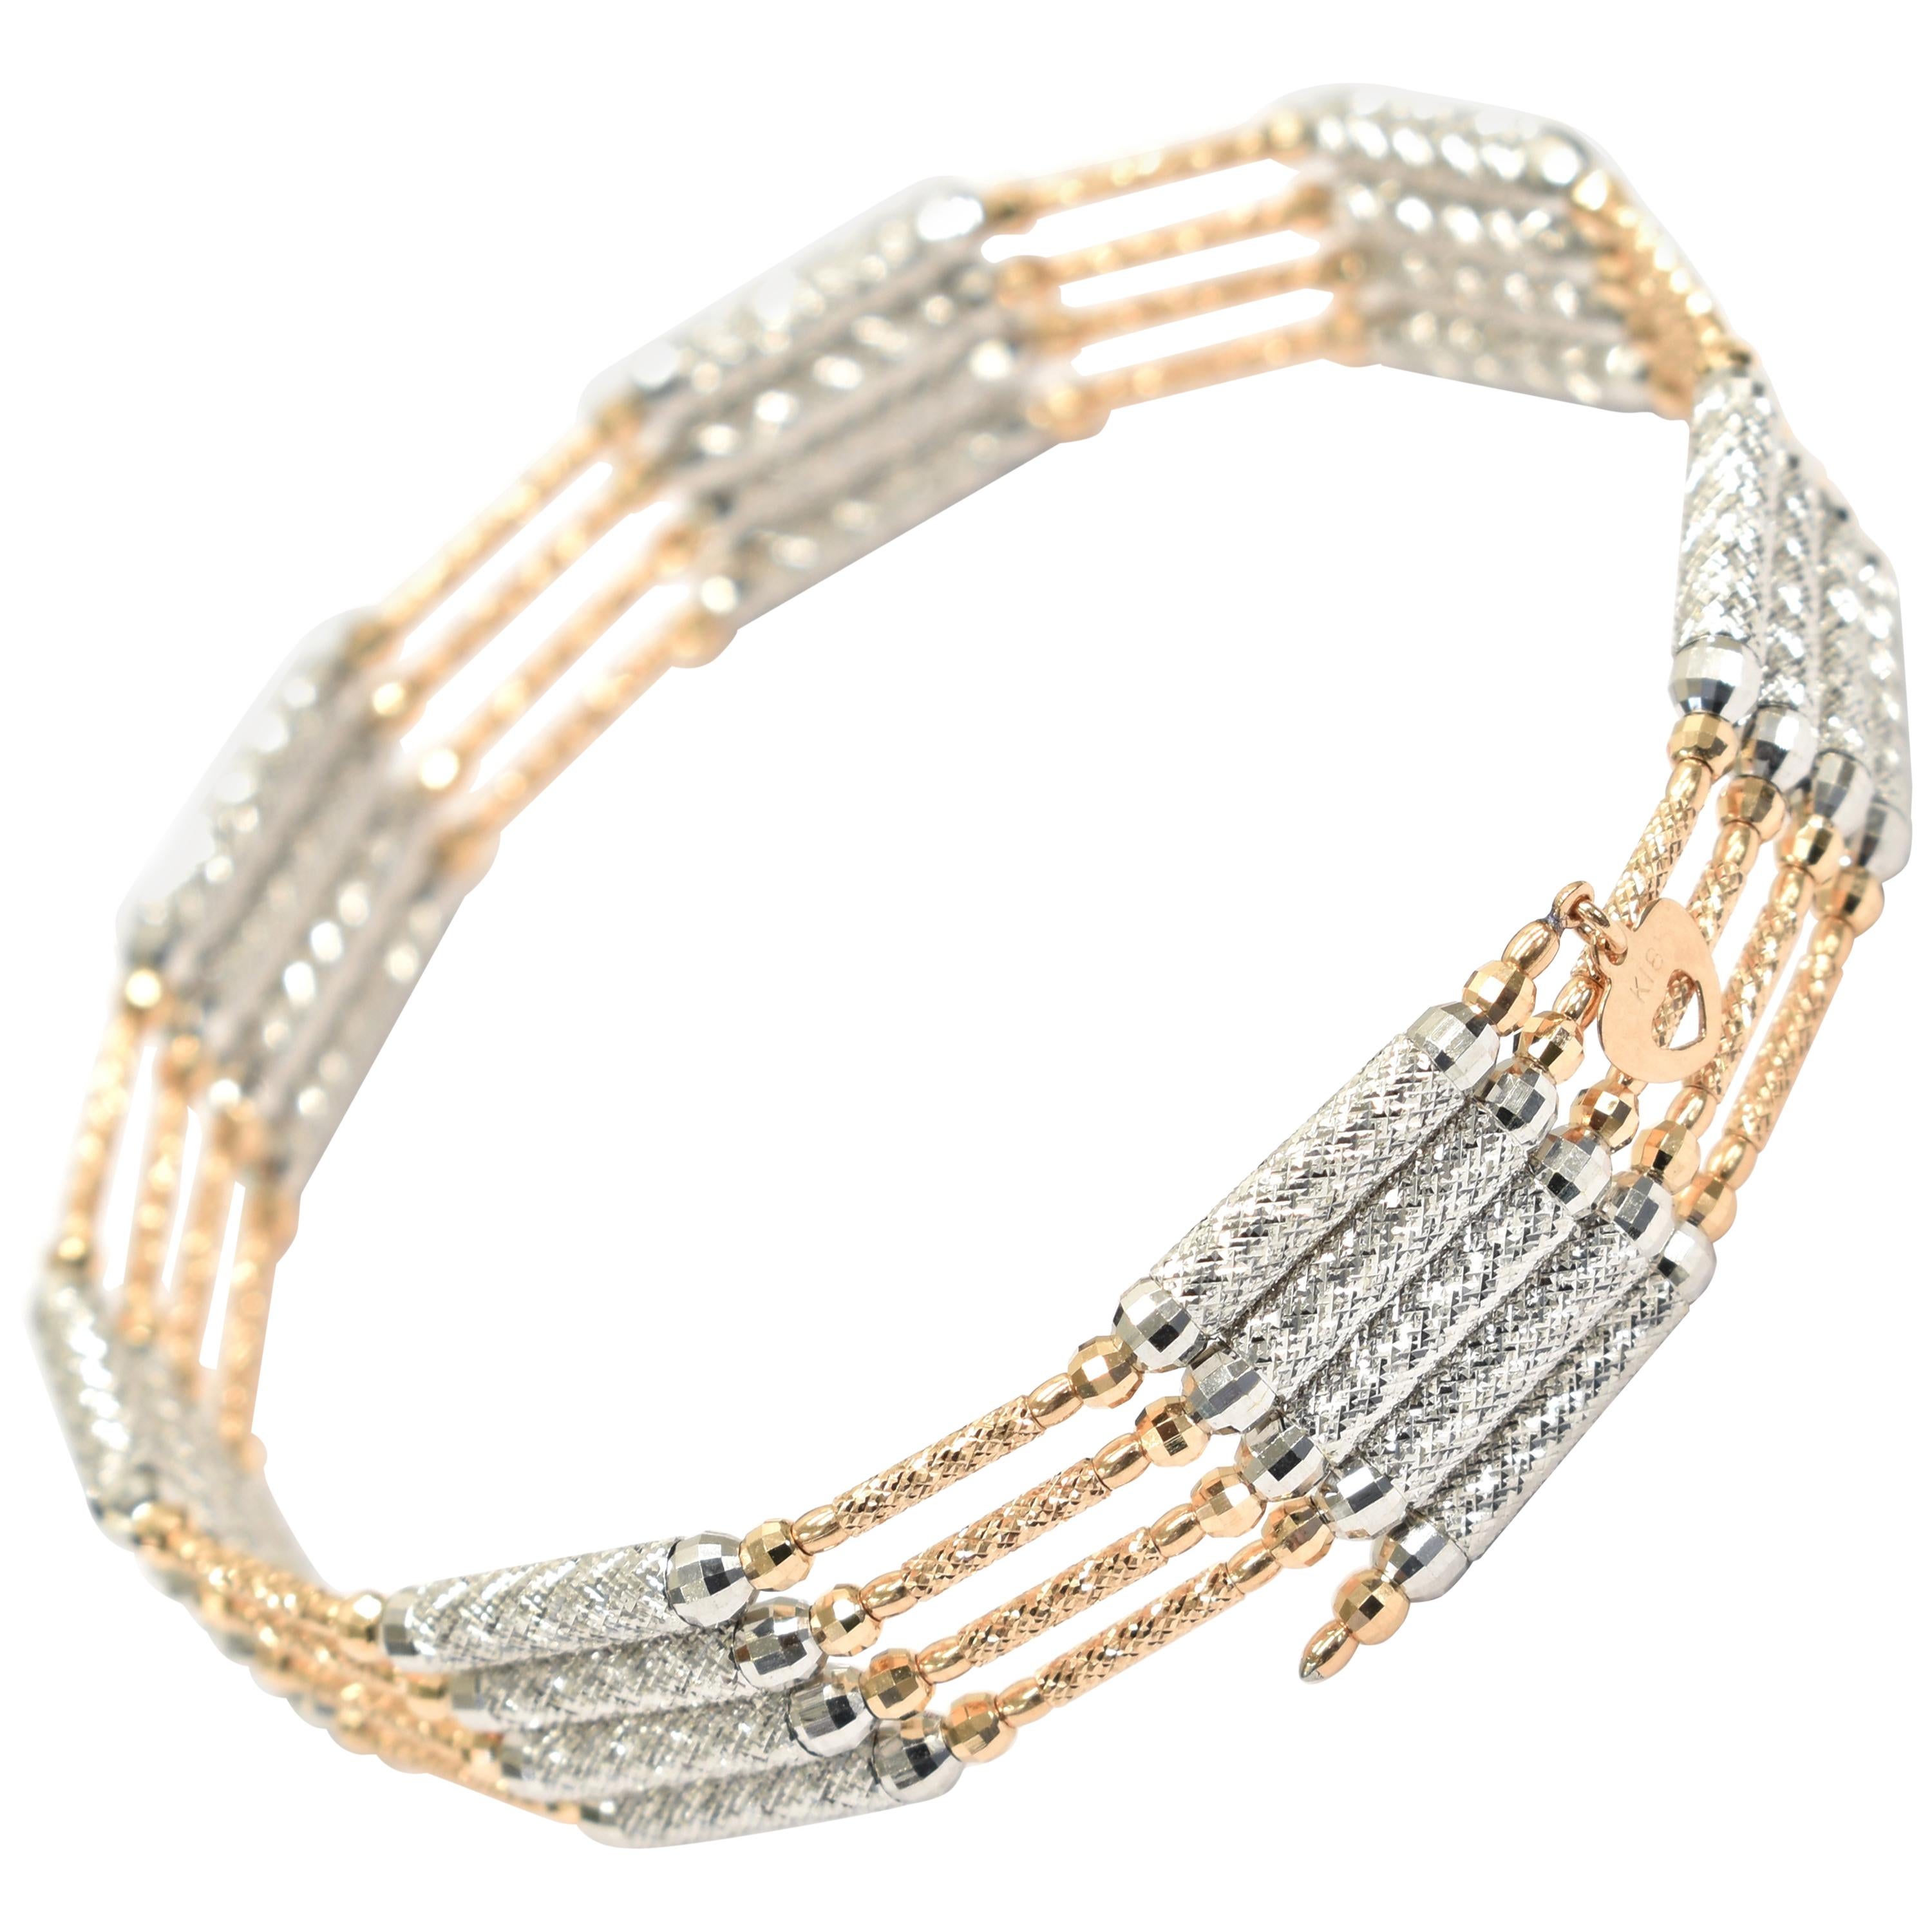 Multi Purpose Magnetic Bracelet/Necklace Made in 18 Karat White and Rose Gold